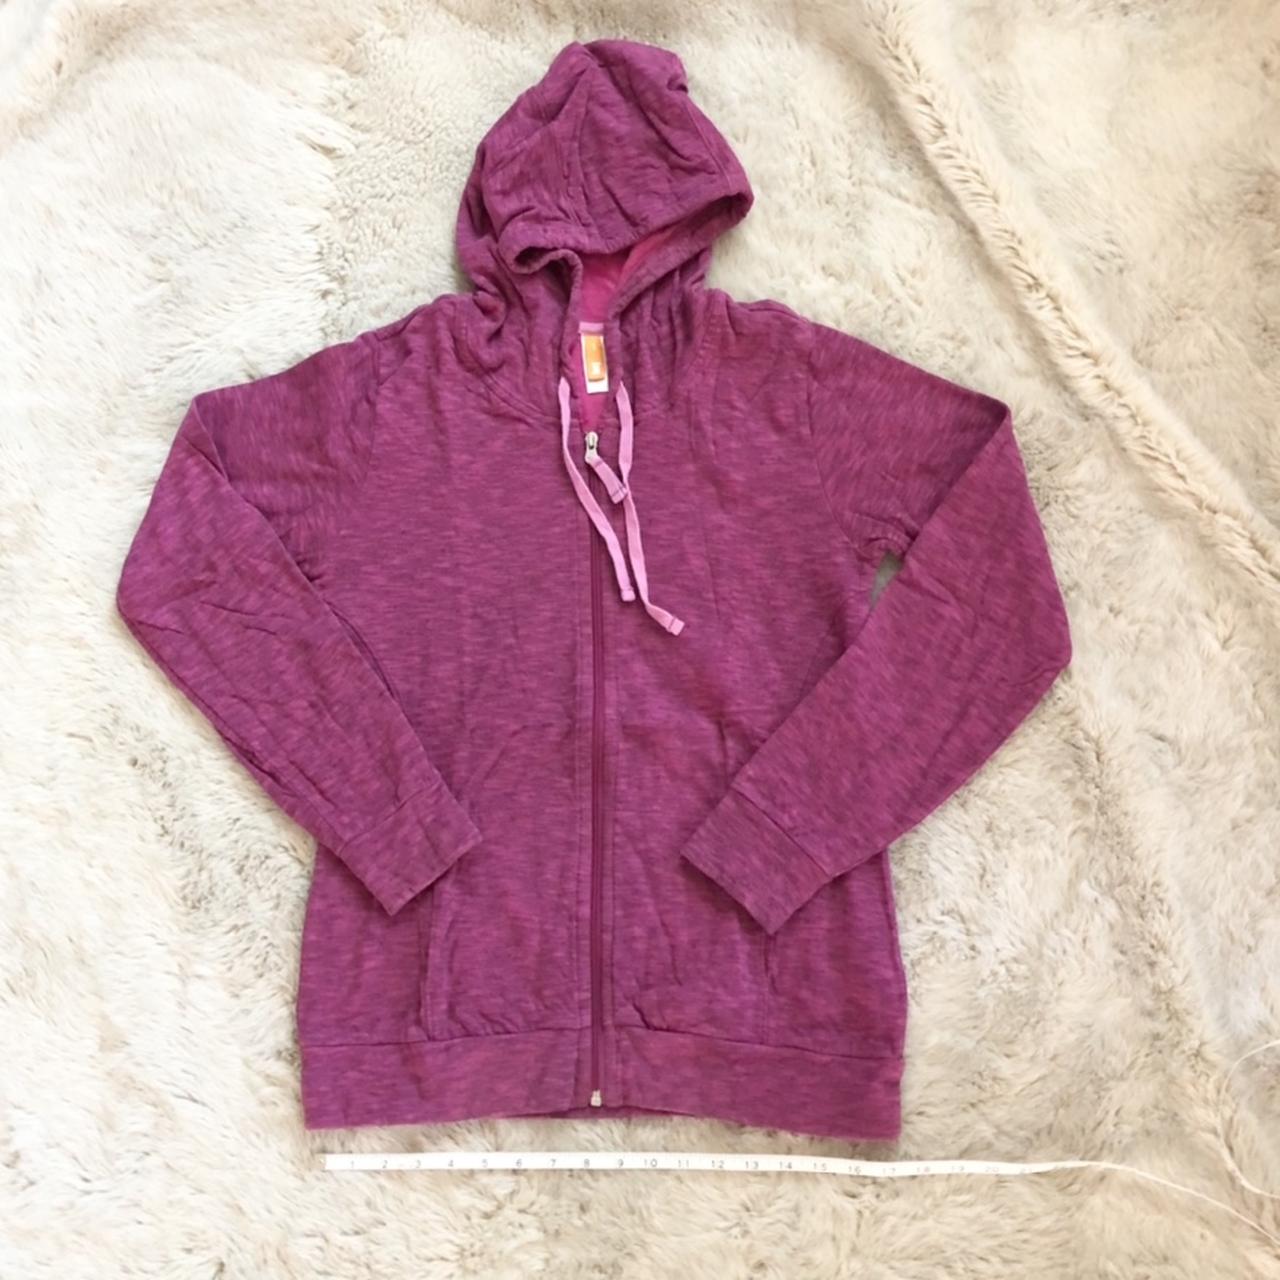 Lucy Women's Pink and Purple Hoodie